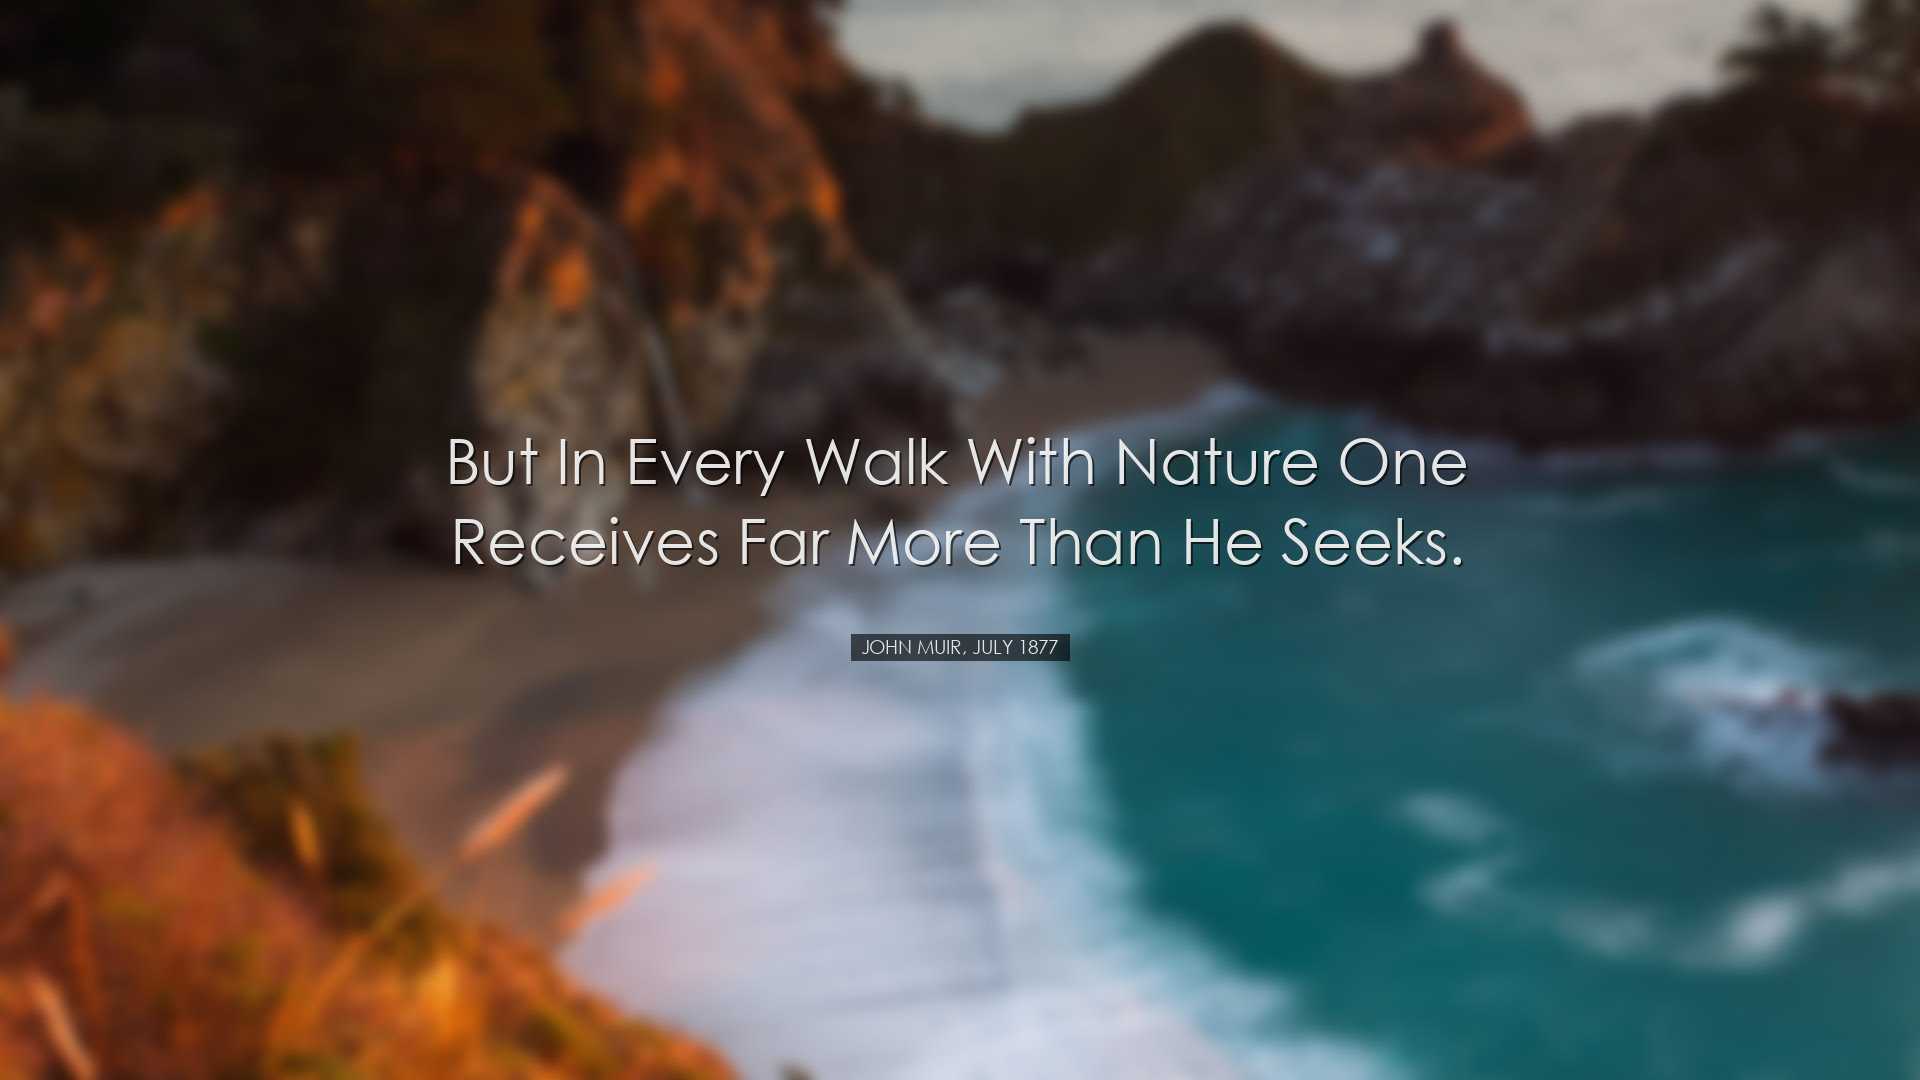 But in every walk with Nature one receives far more than he seeks.